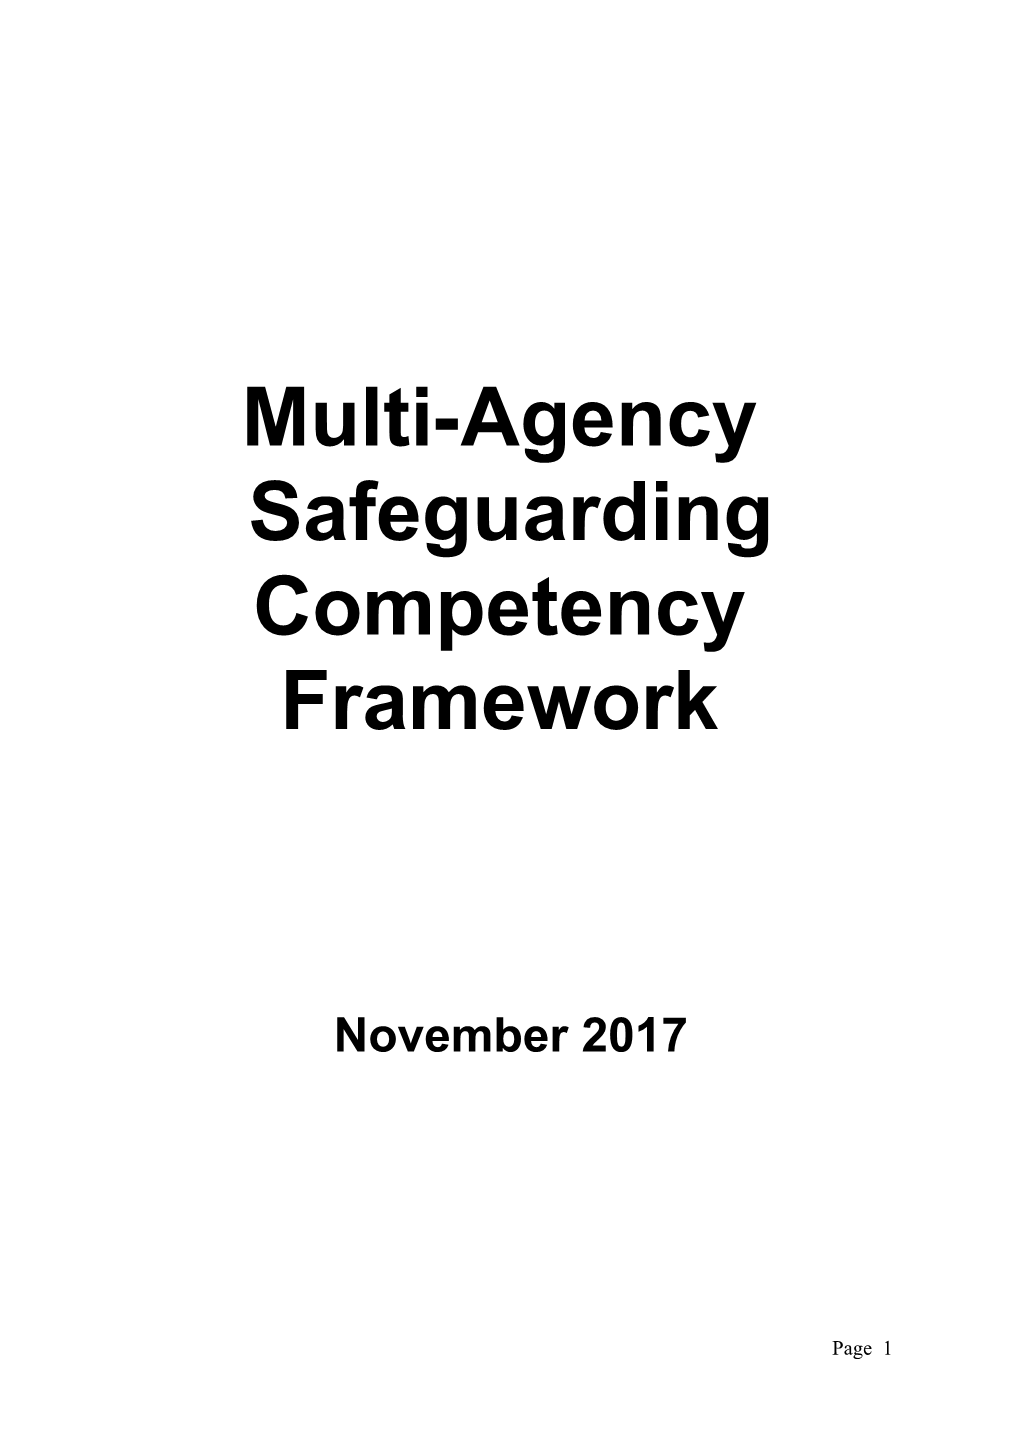 Who Should Use Wscbs Multi-Agency Safeguarding Competency Framework?